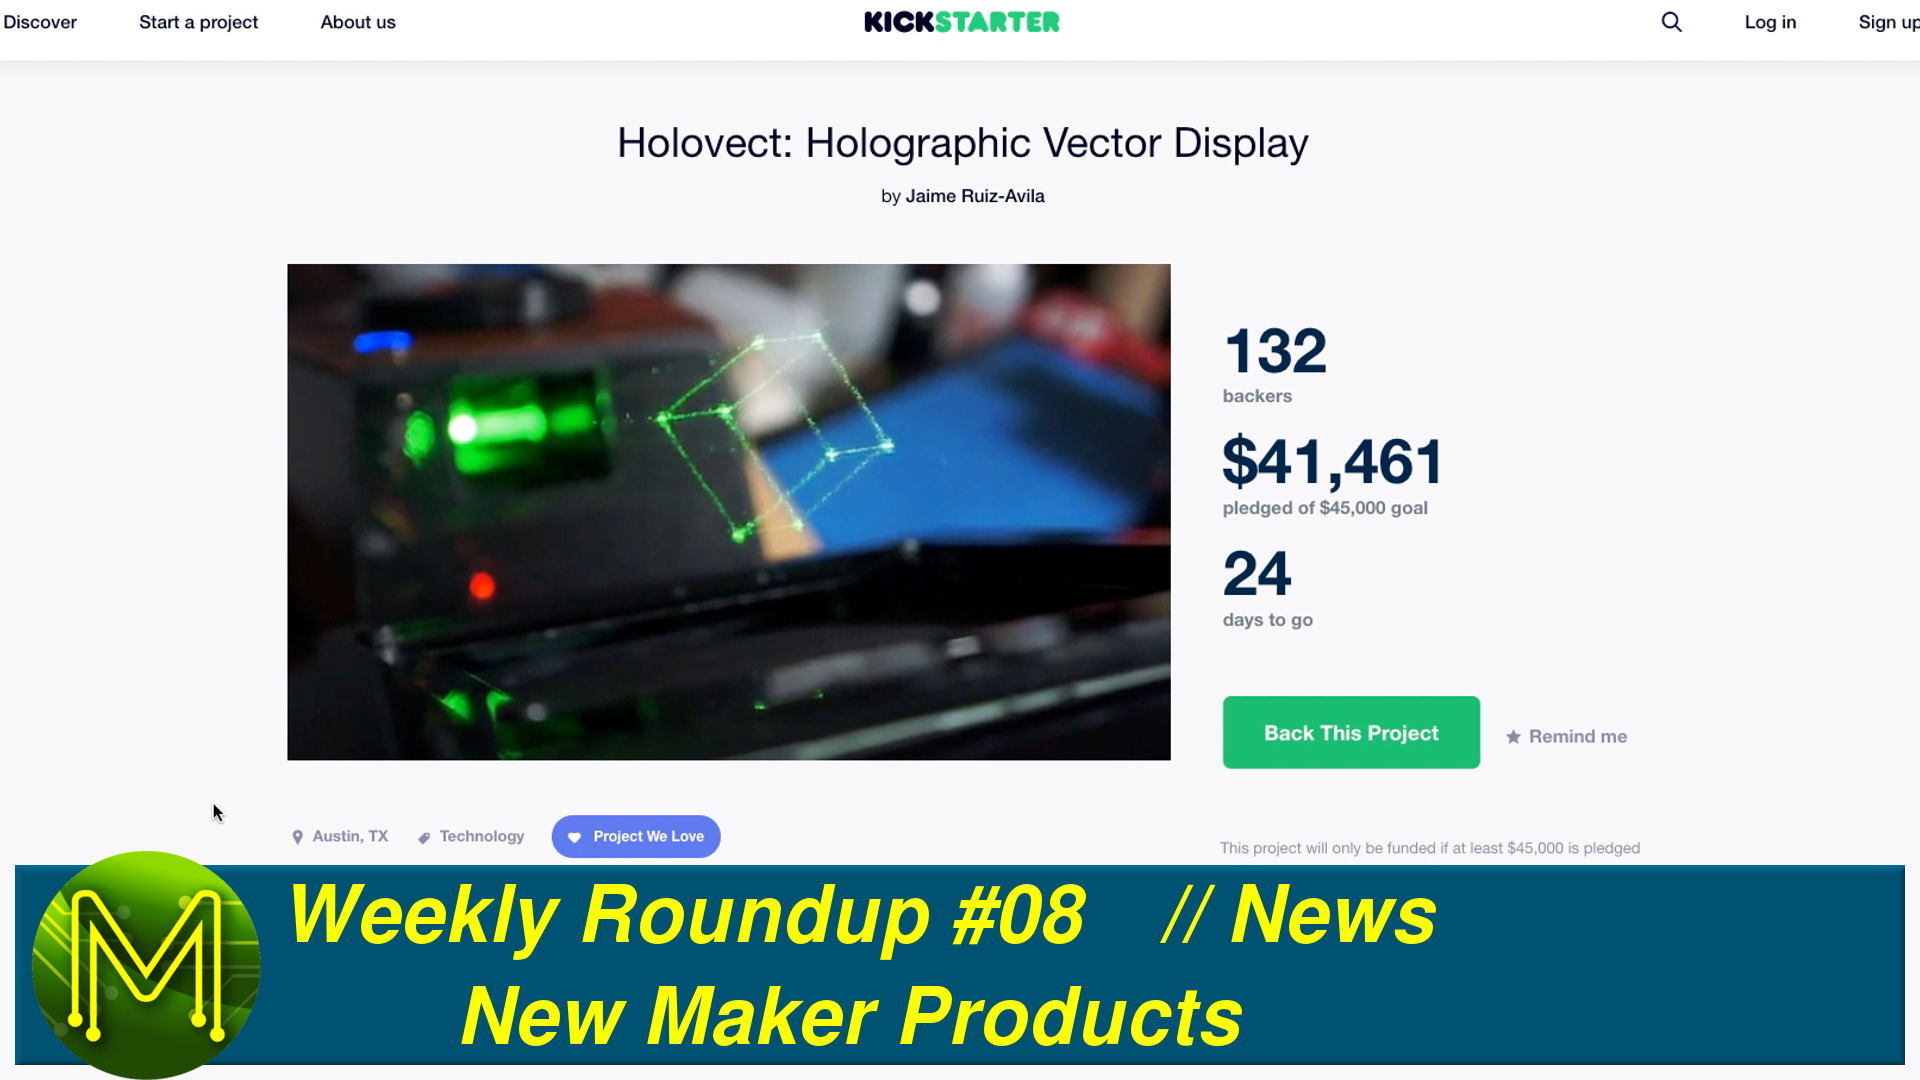 Weekly Roundup #08 - New Maker Products // News